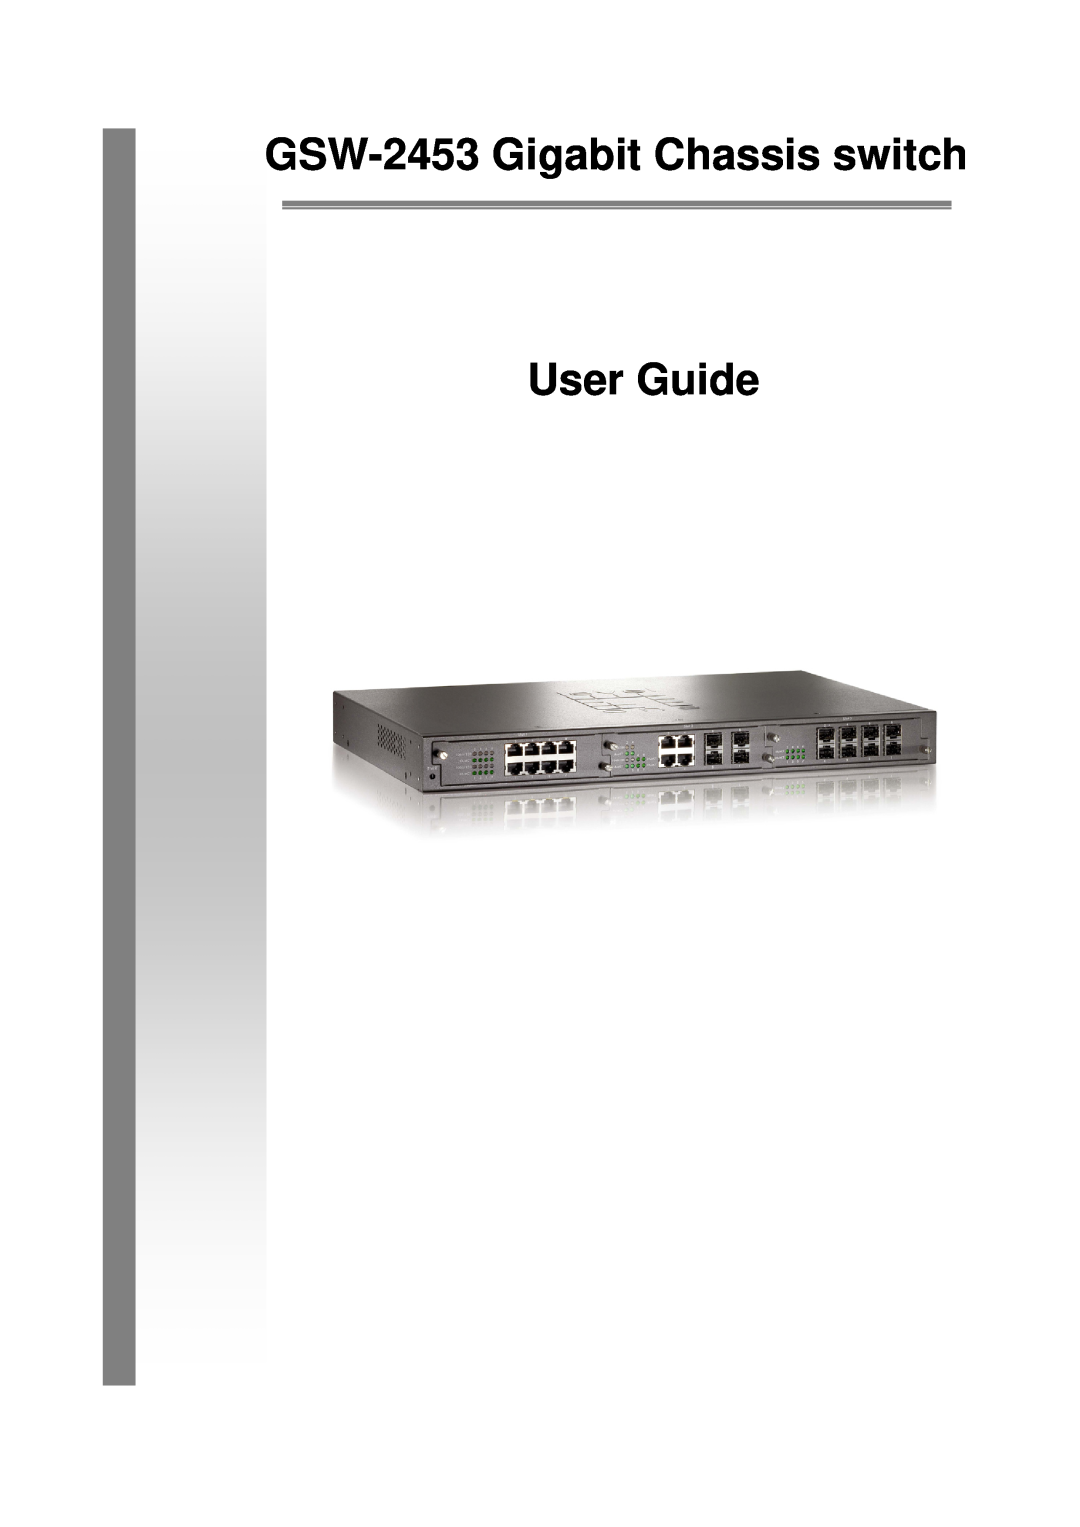 LevelOne manual GSW-2453 Gigabit Chassis switch, User Guide 